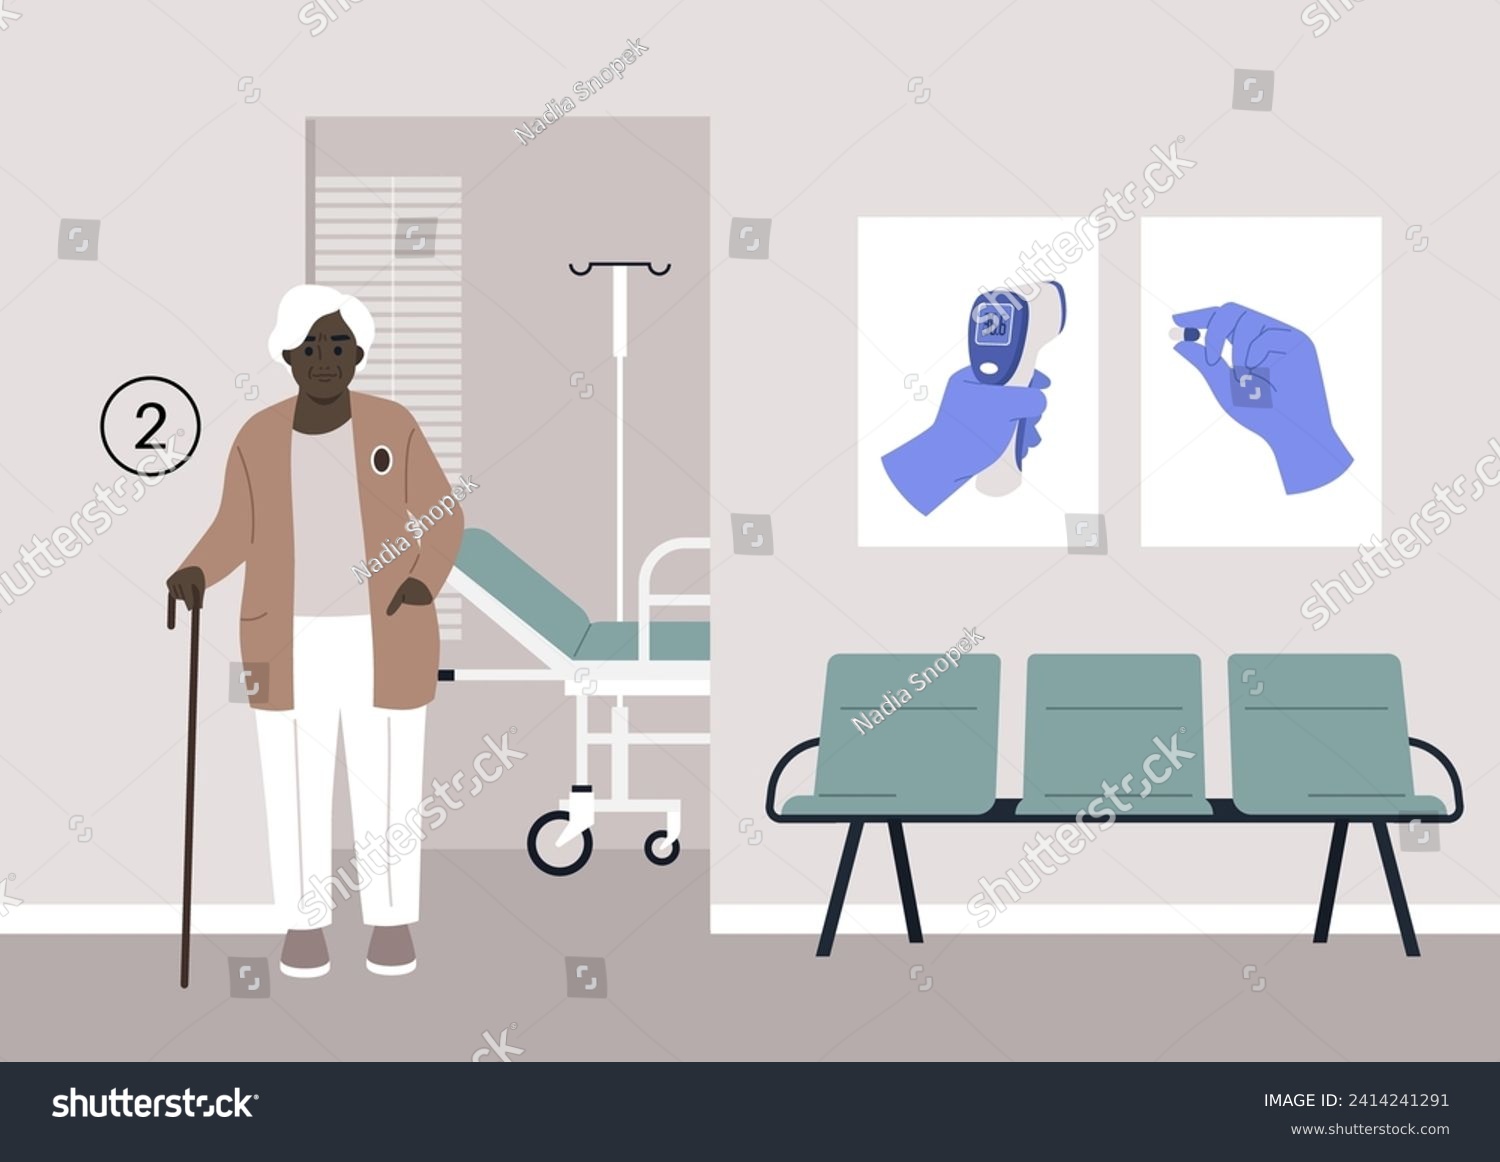 SVG of An elderly individual patiently waits in the hospital corridor, anticipating their annual checkup svg